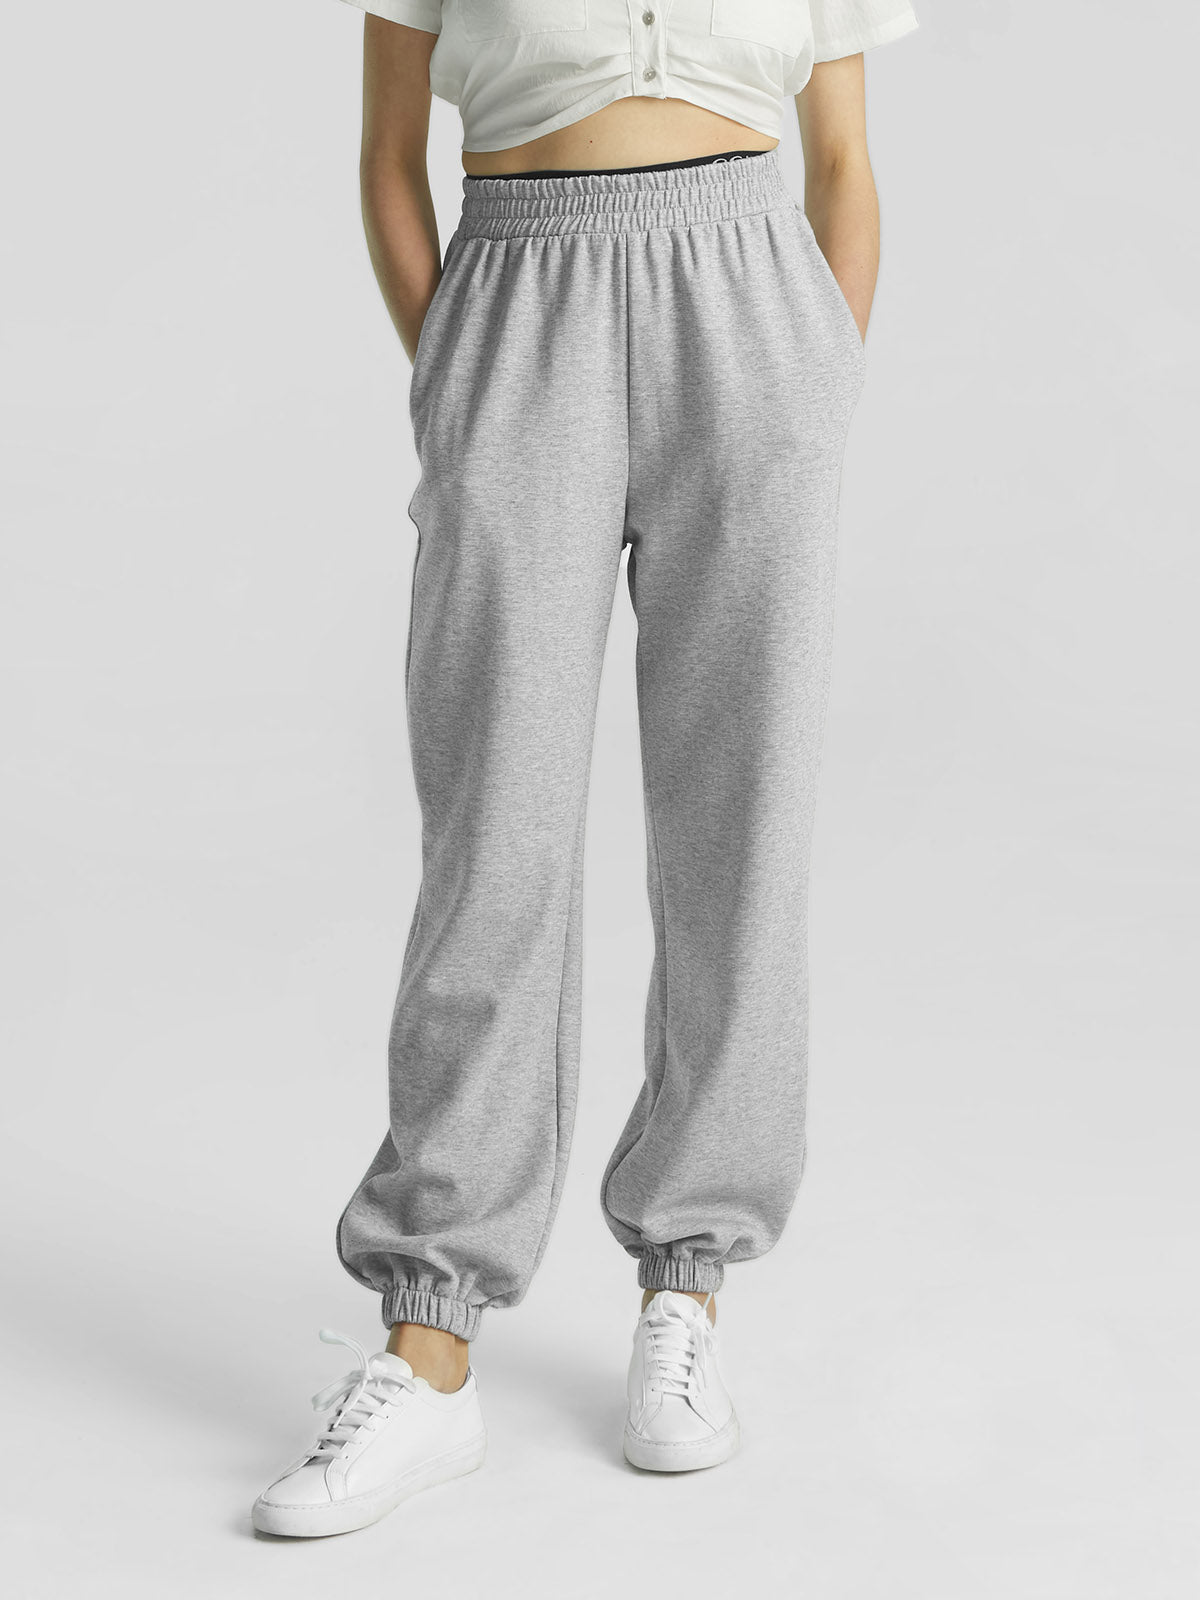 COLLUSION Unisex sweatpants double waistband